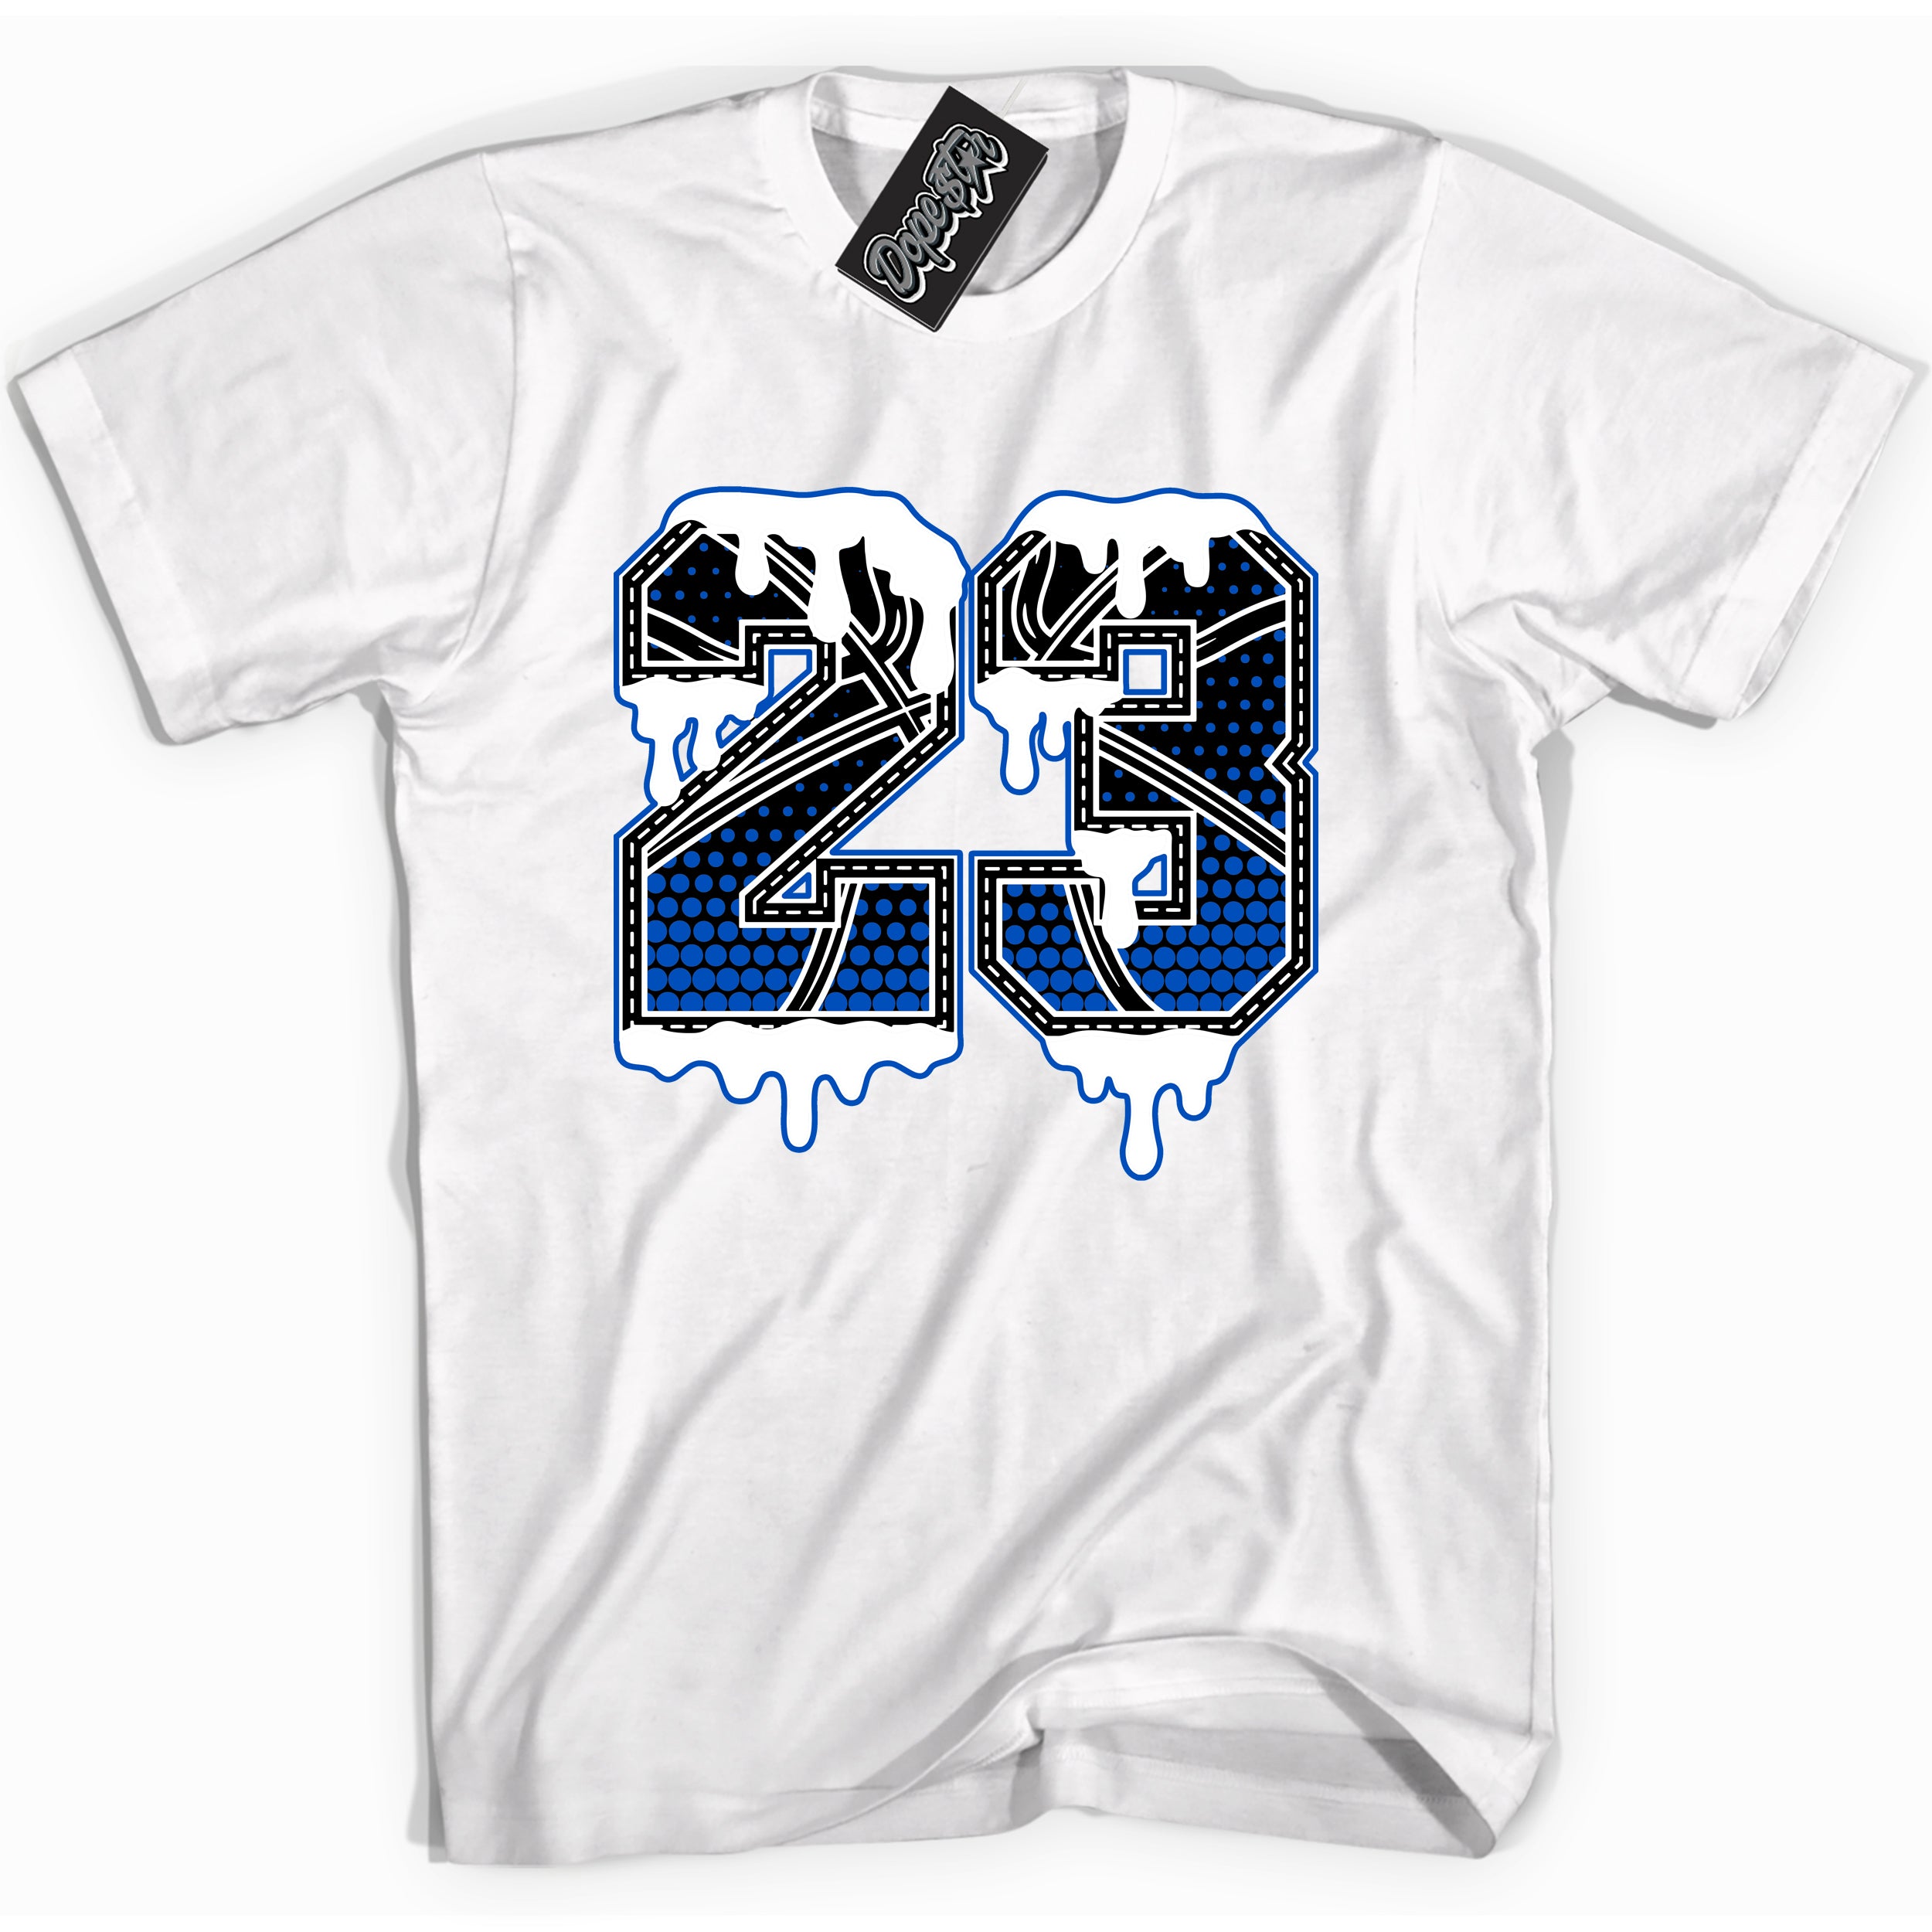 Cool White graphic tee with "23 Ball" design, that perfectly matches Royal Reimagined 1s sneakers 